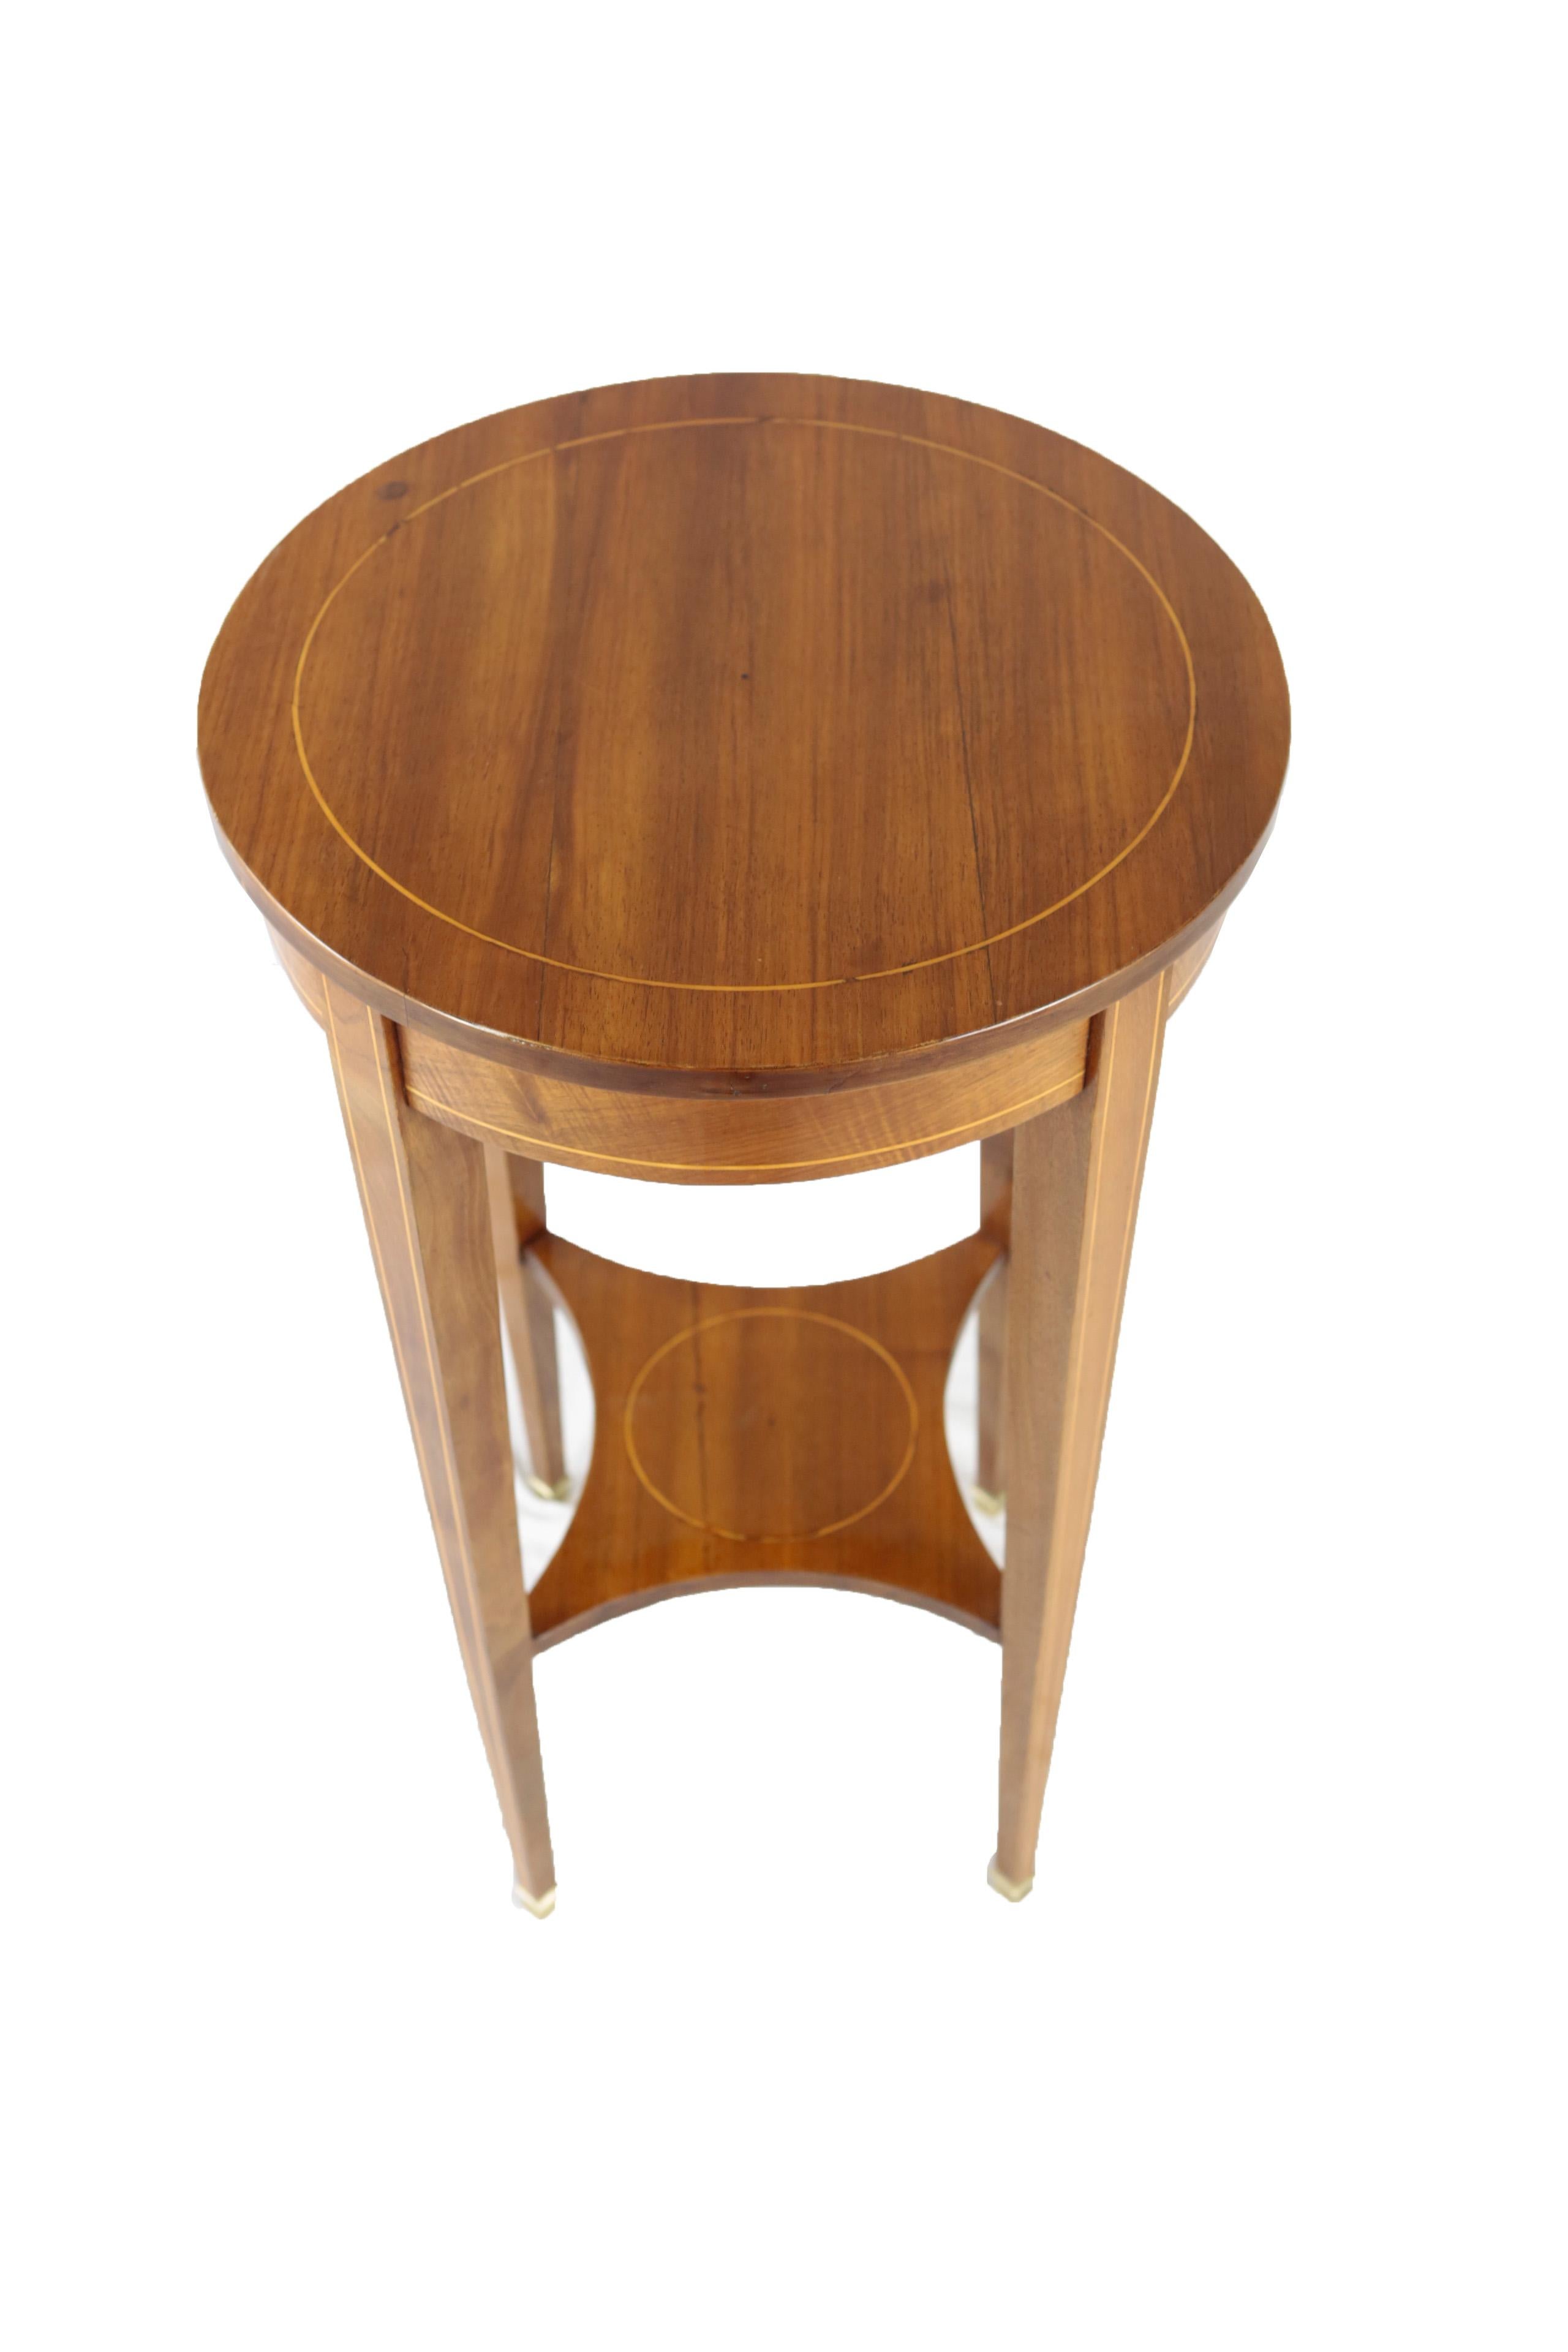 Veneer French Rosewood Gueridon Side Table, Late 19th Century, circa 1880-1990 For Sale